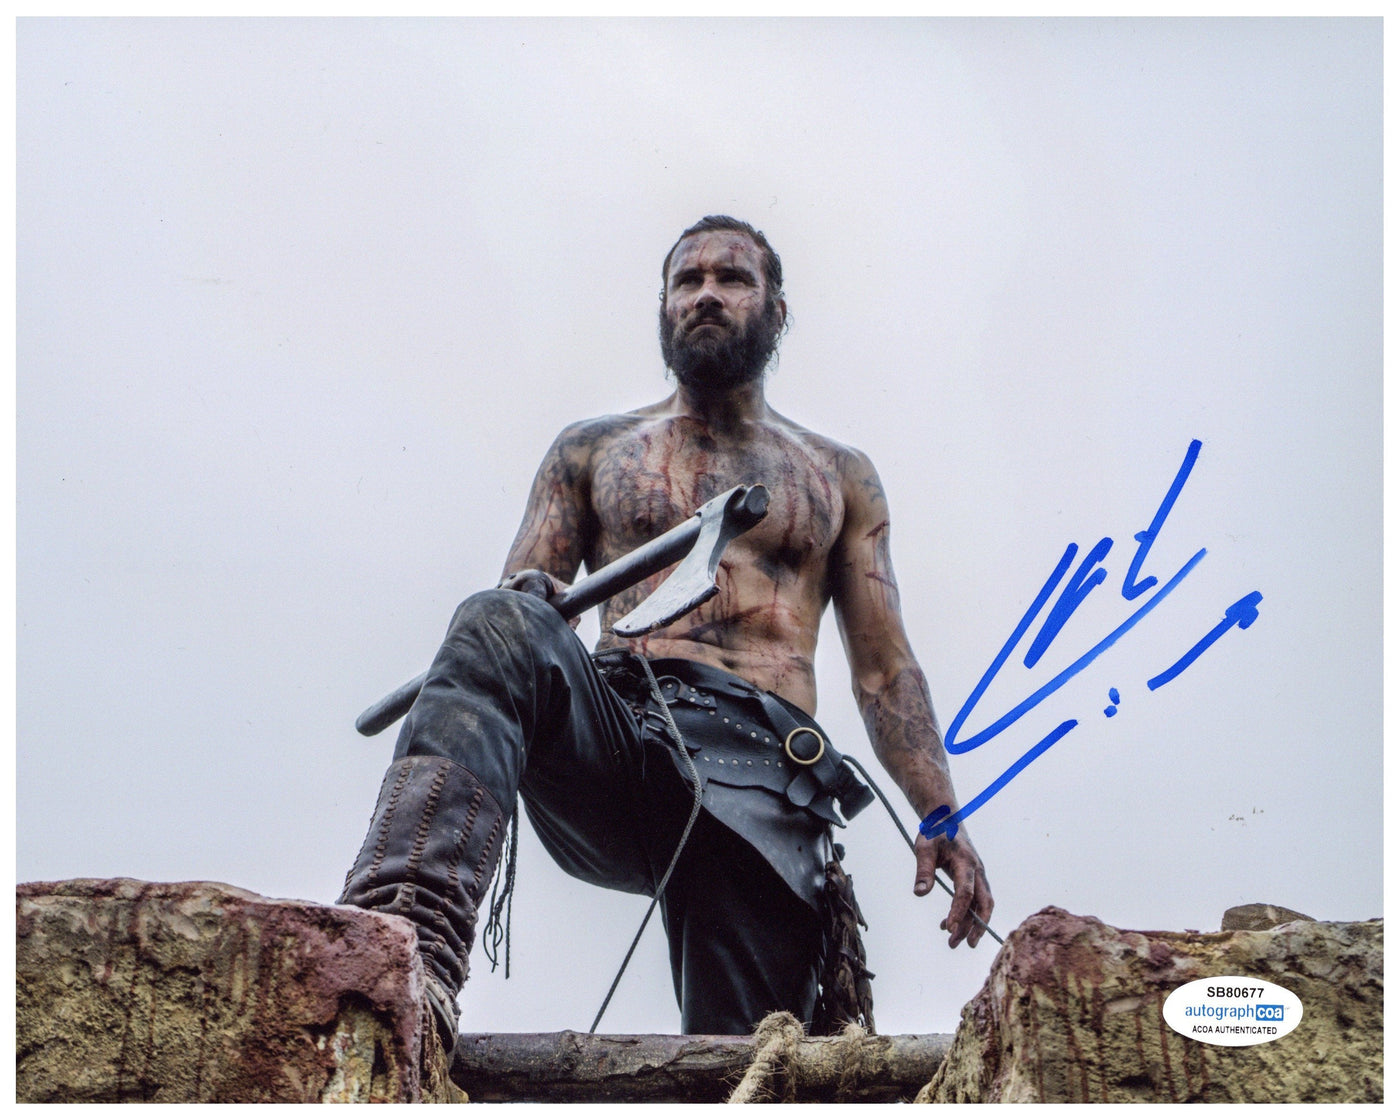 Clive Standen Signed 8x10 Photo Vikings Authentic Autographed ACOA